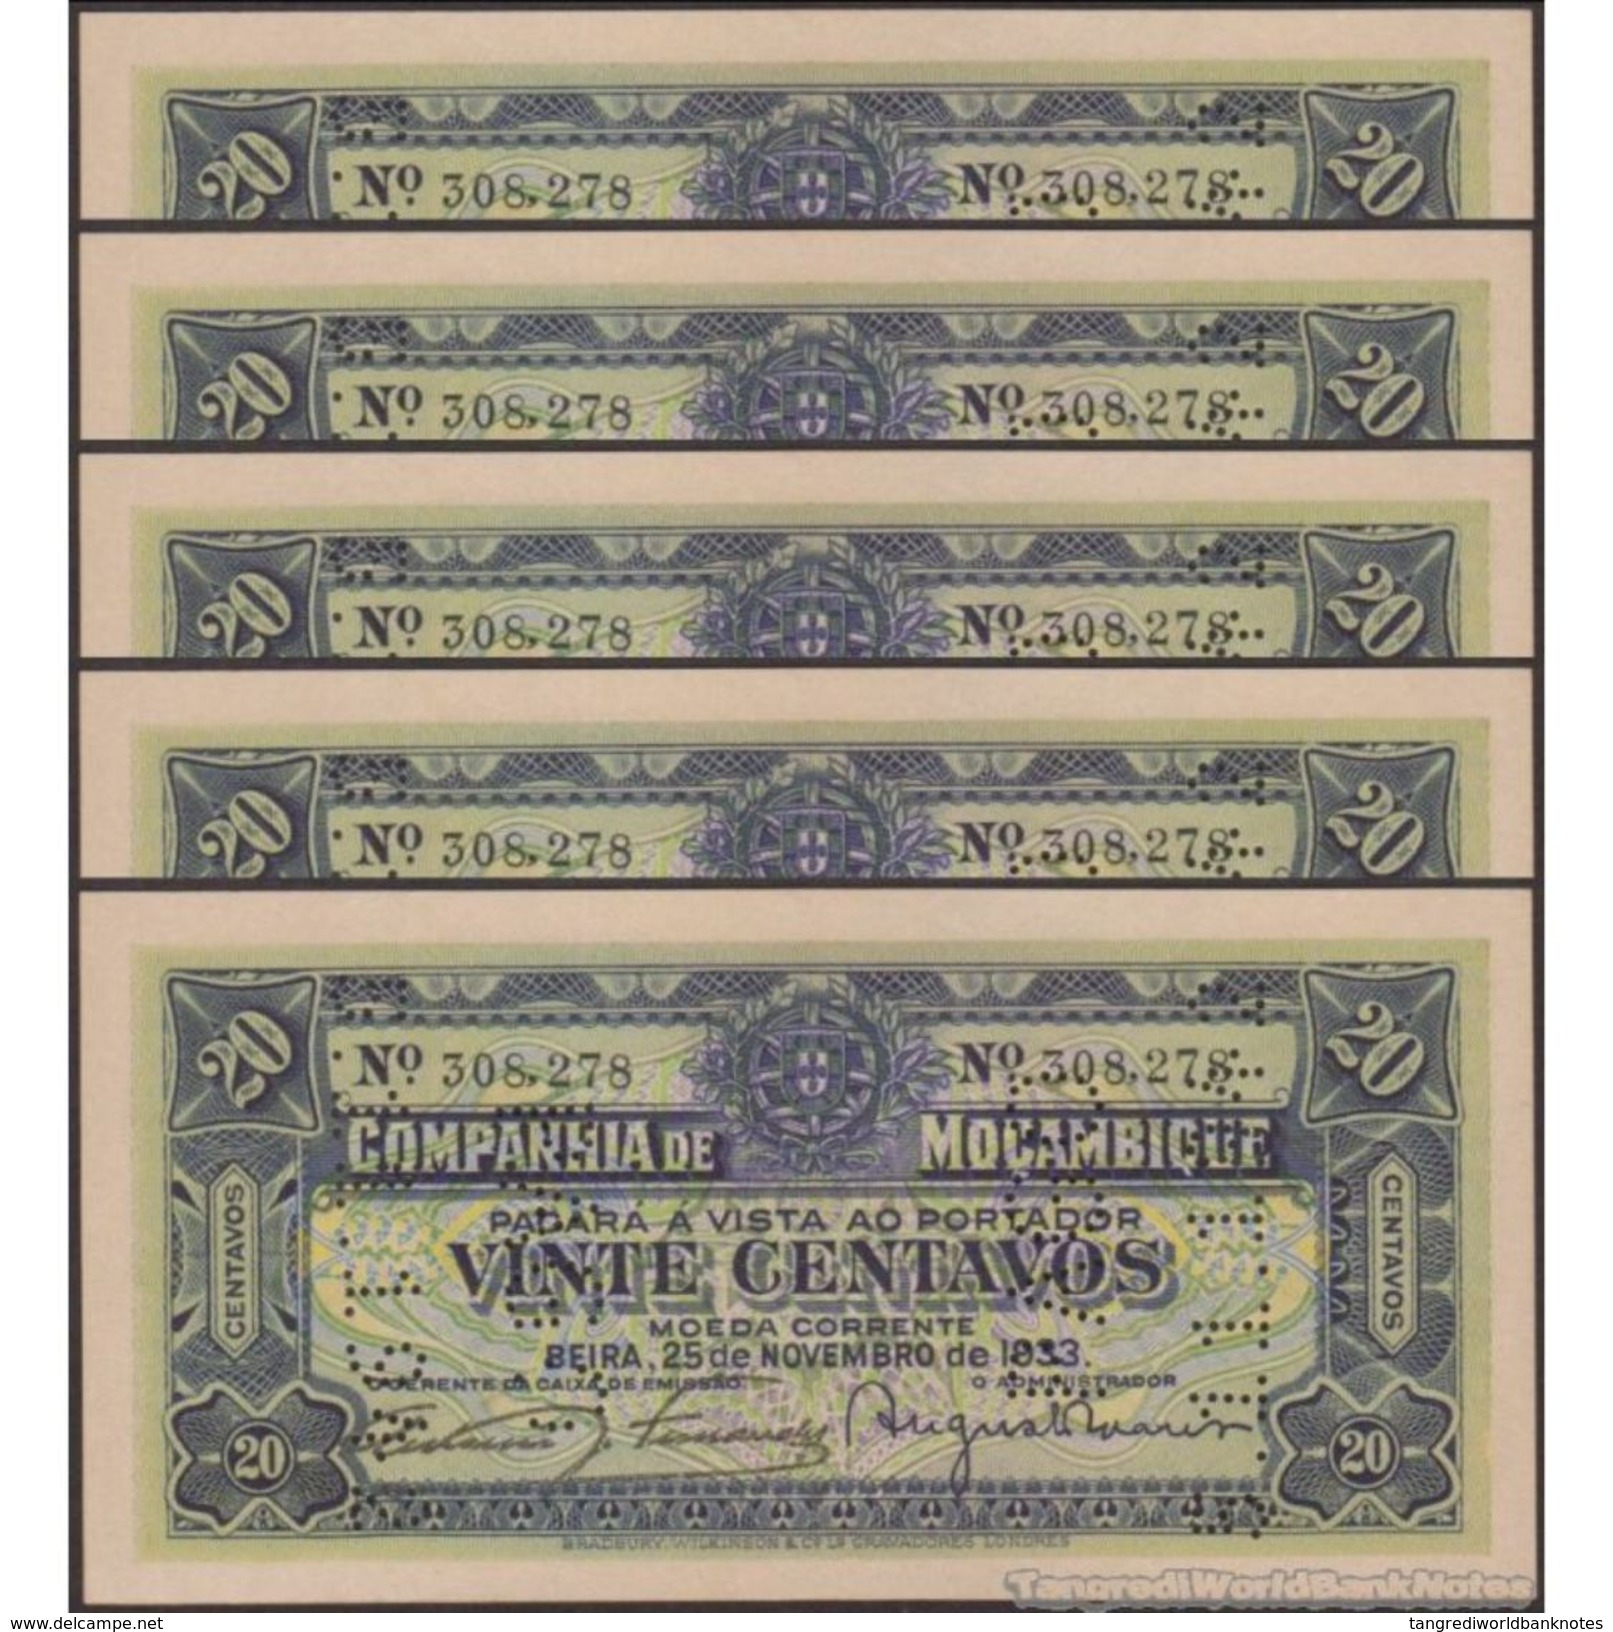 TWN - MOZAMBIQUE R29 - 20 Centavos 25.11.1933 DEALERS LOT X 5 - Perforated: PAGO 5.11.1942﻿ AU - Mozambico